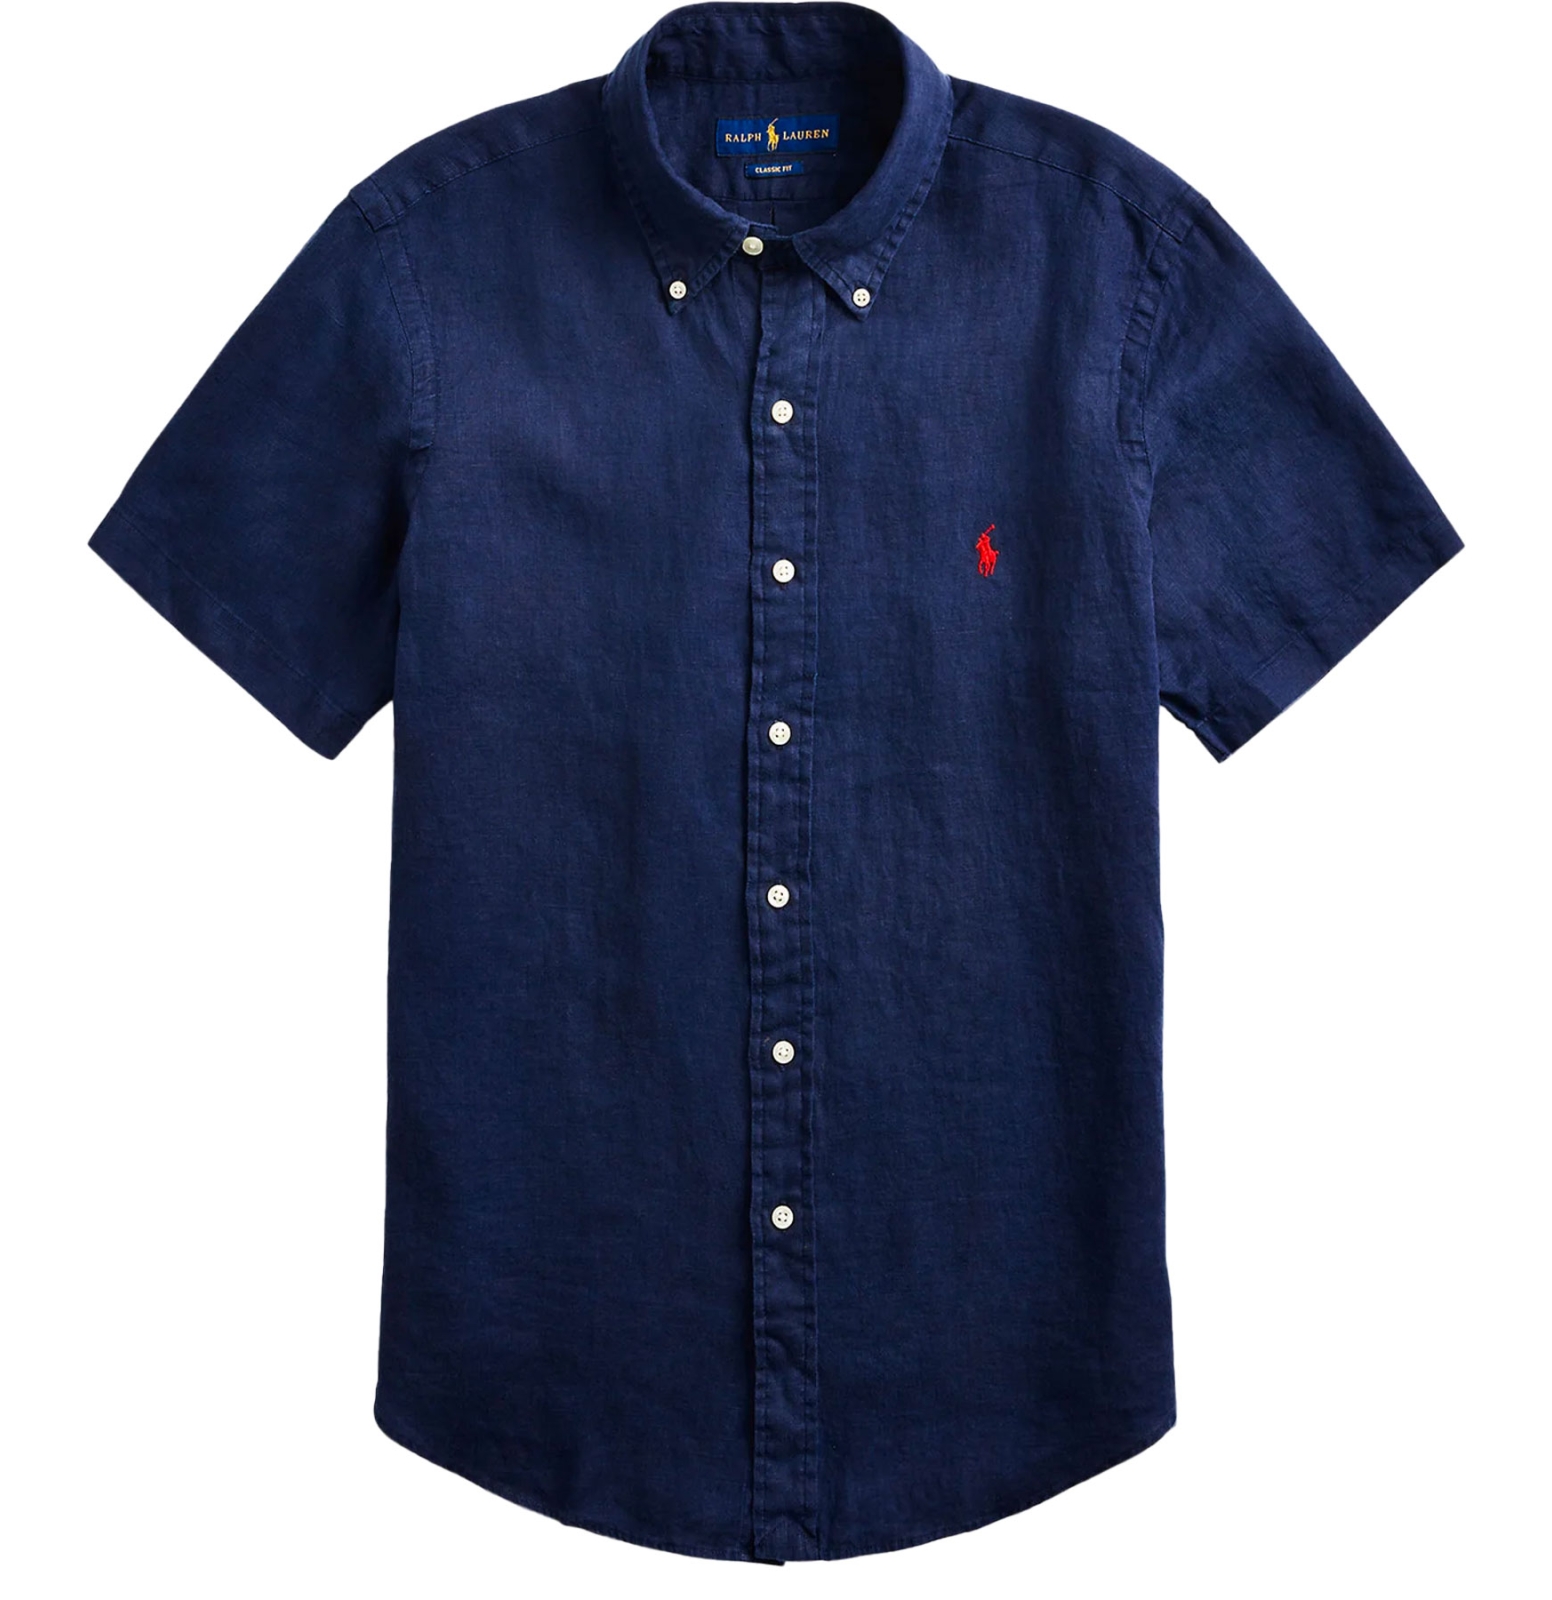 CHEMISE LIN MANCHES COURTES MARINE